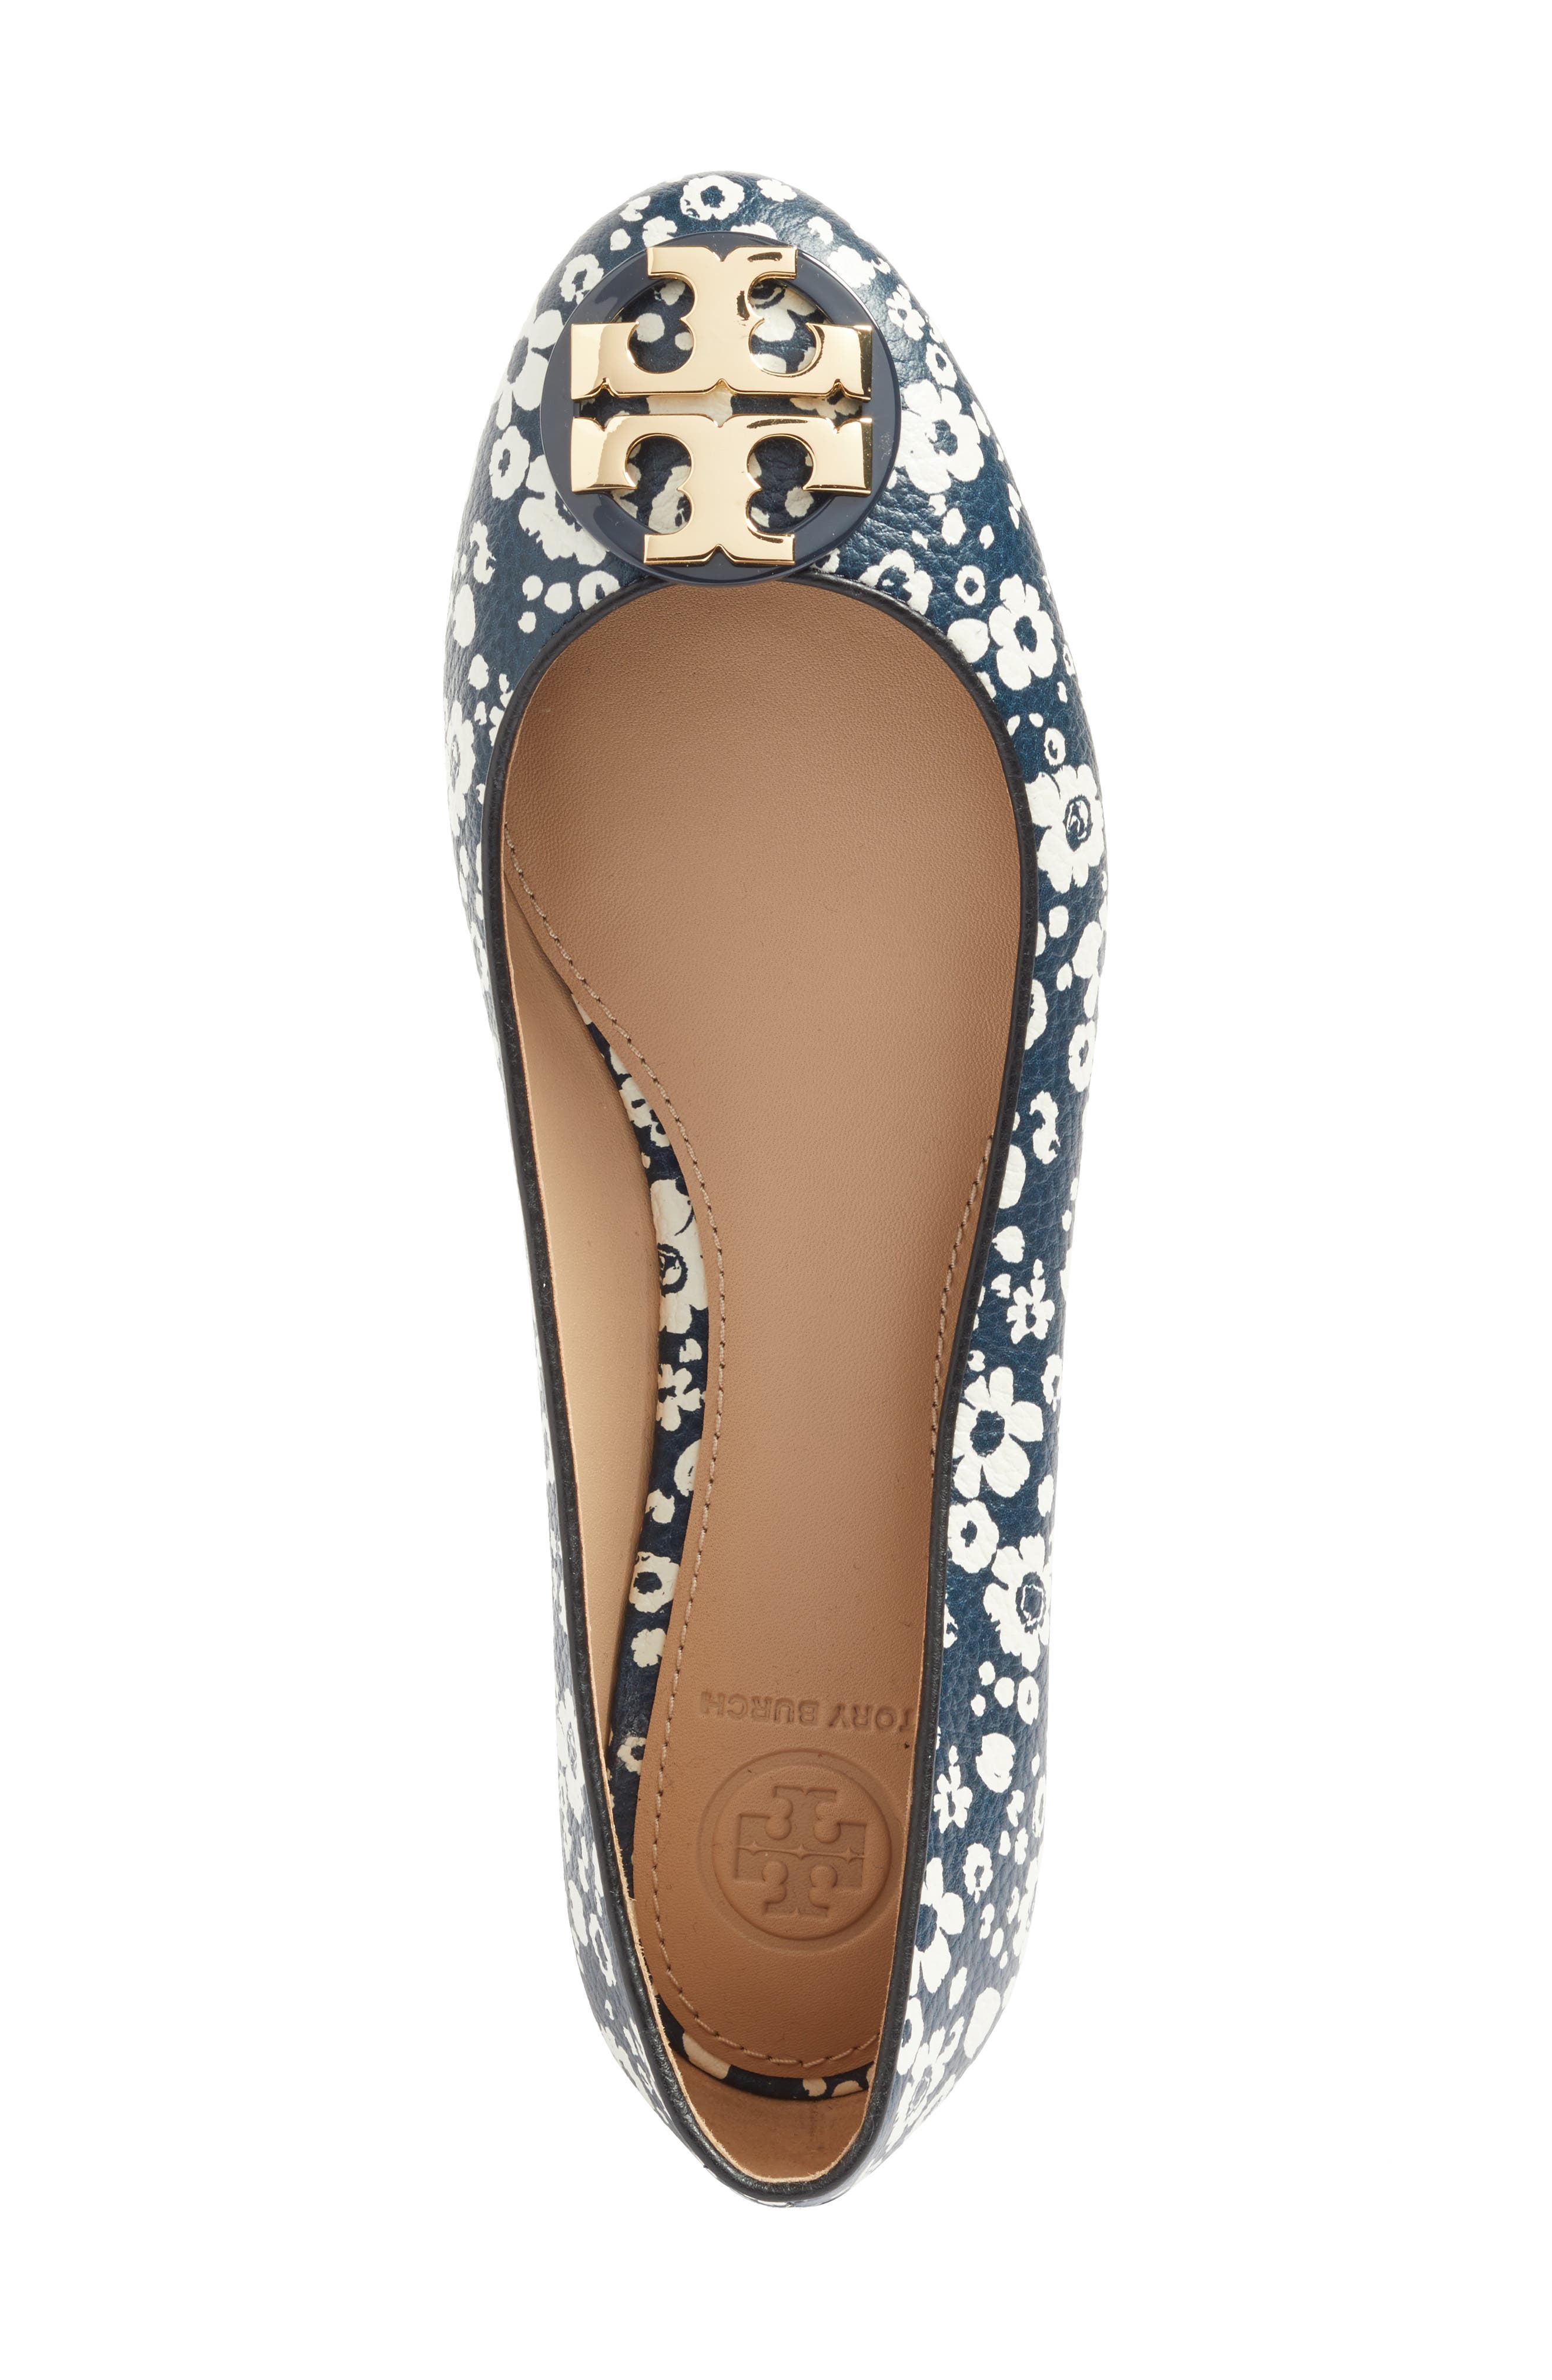 claire ballet flat tory burch